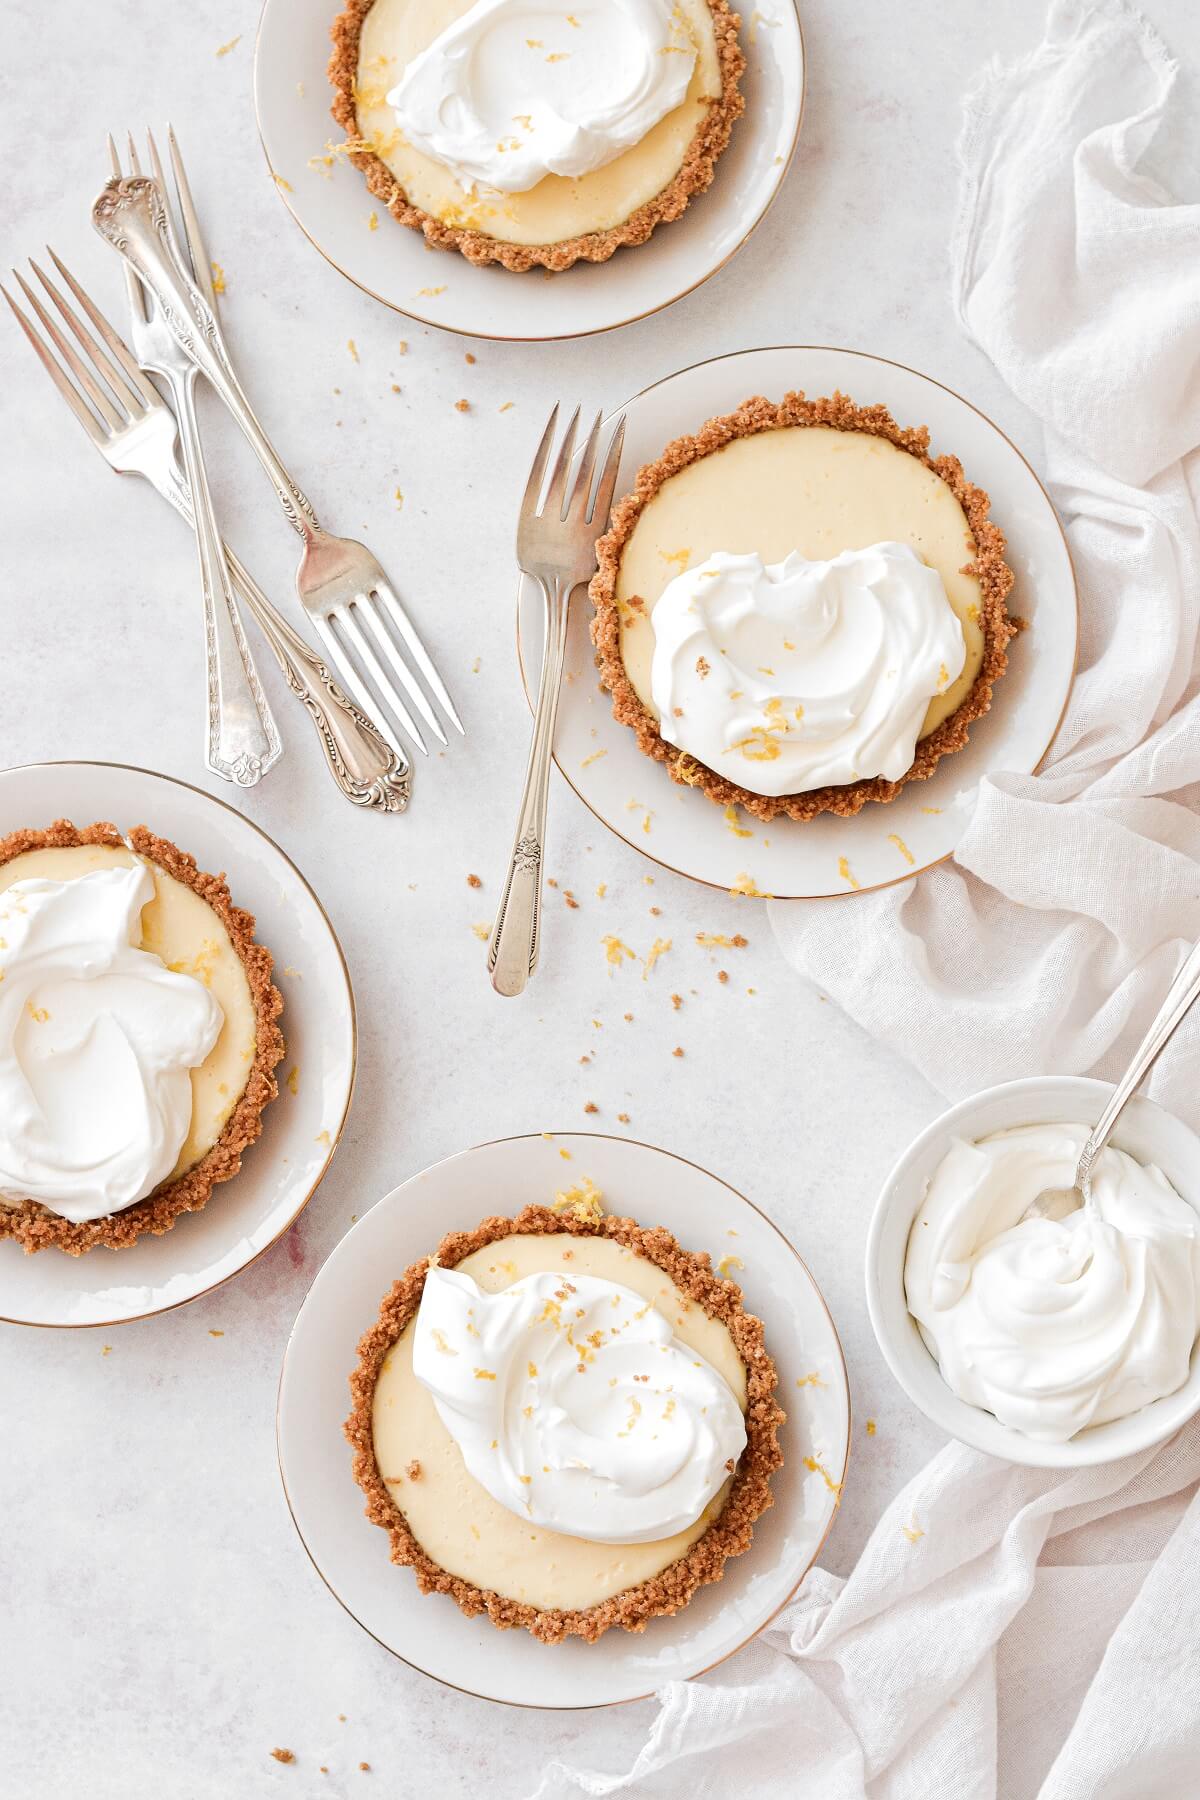 Lemon icebox pie, baked in individual lemon tarts, topped with whipped cream.